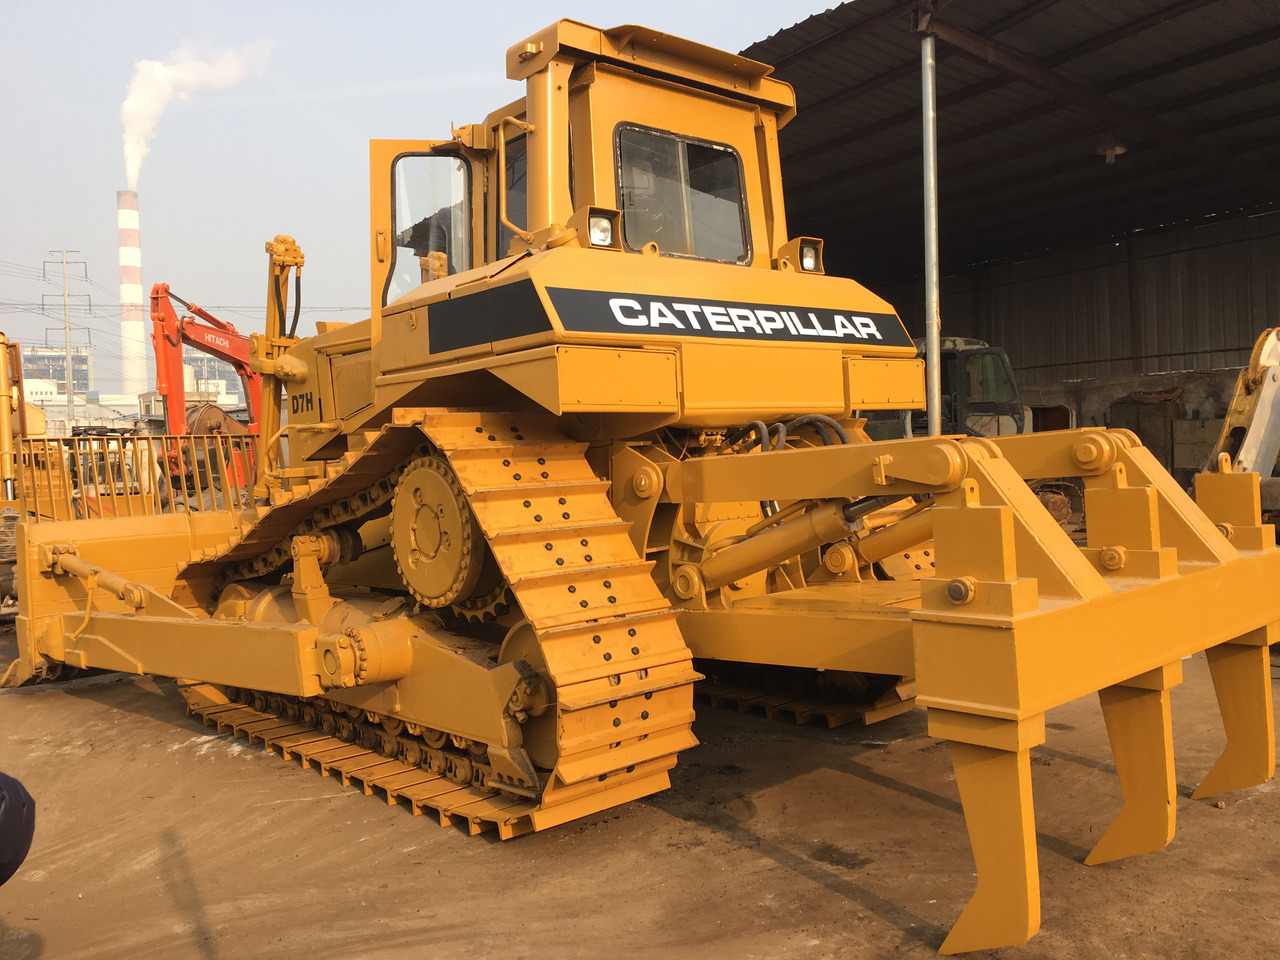 Nowy Spycharka Famous brand CATERPILLAR D7H in good condition on sale: zdjęcie 2